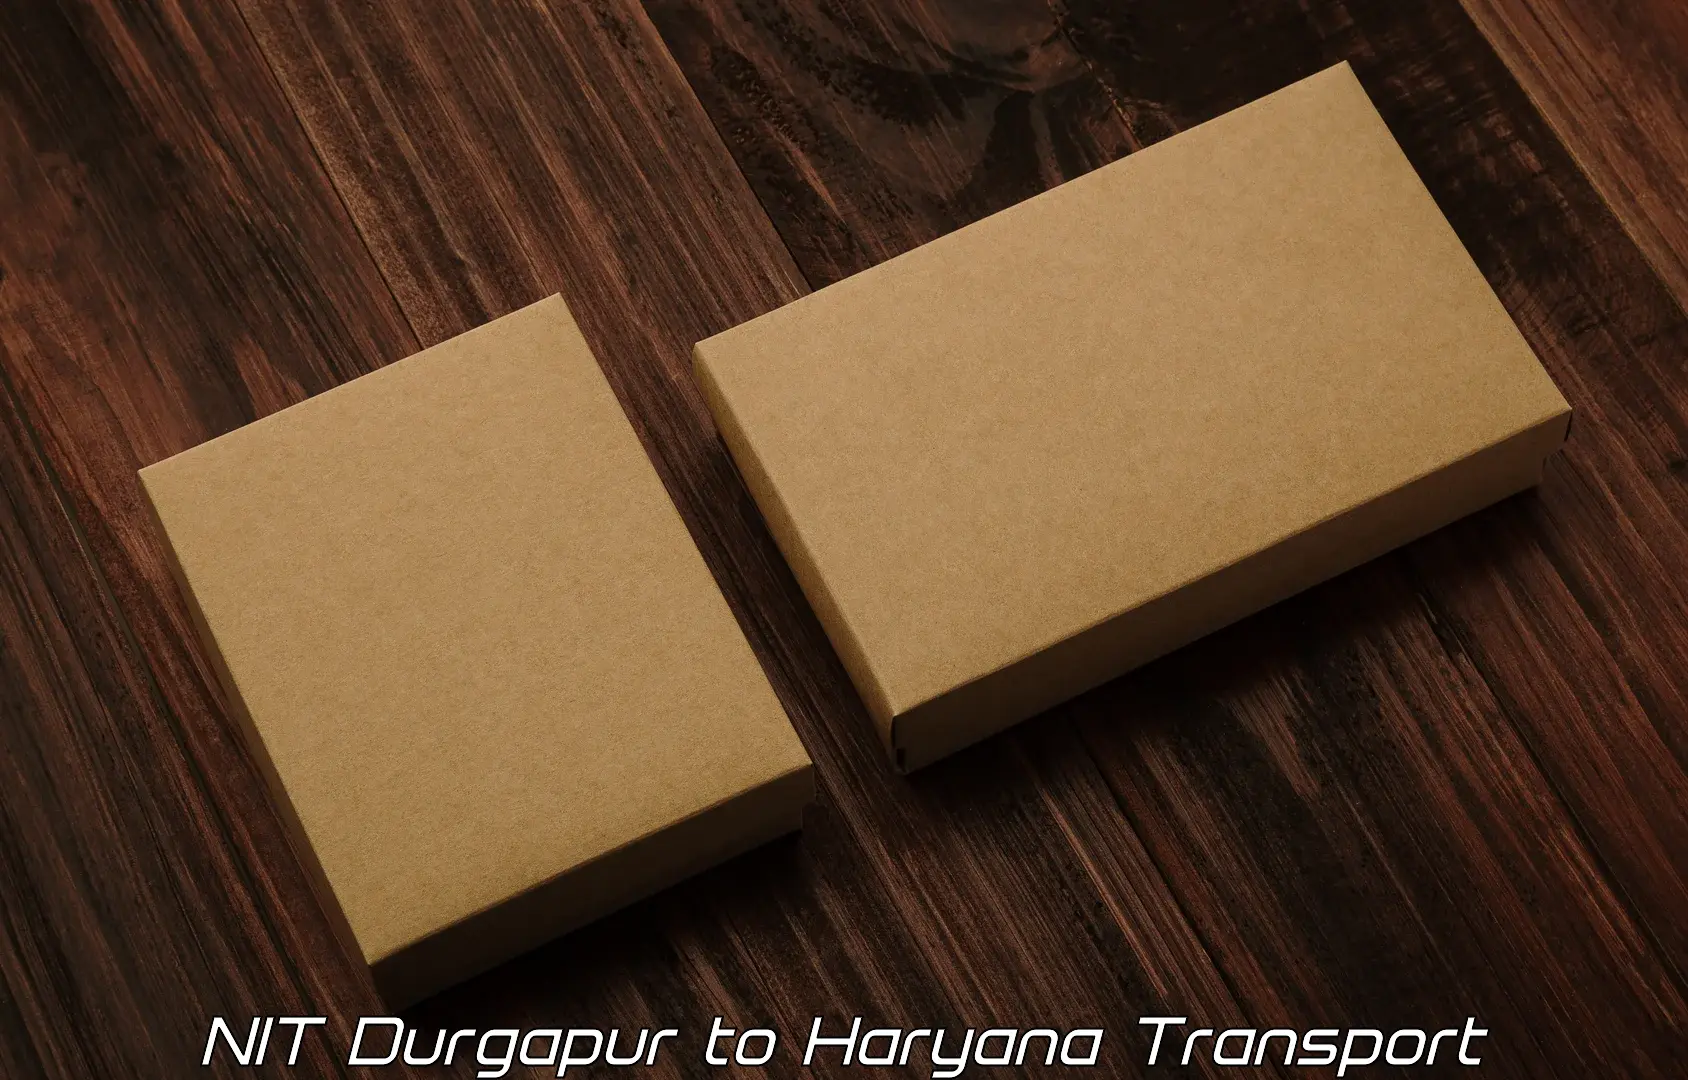 Vehicle transport services NIT Durgapur to NCR Haryana